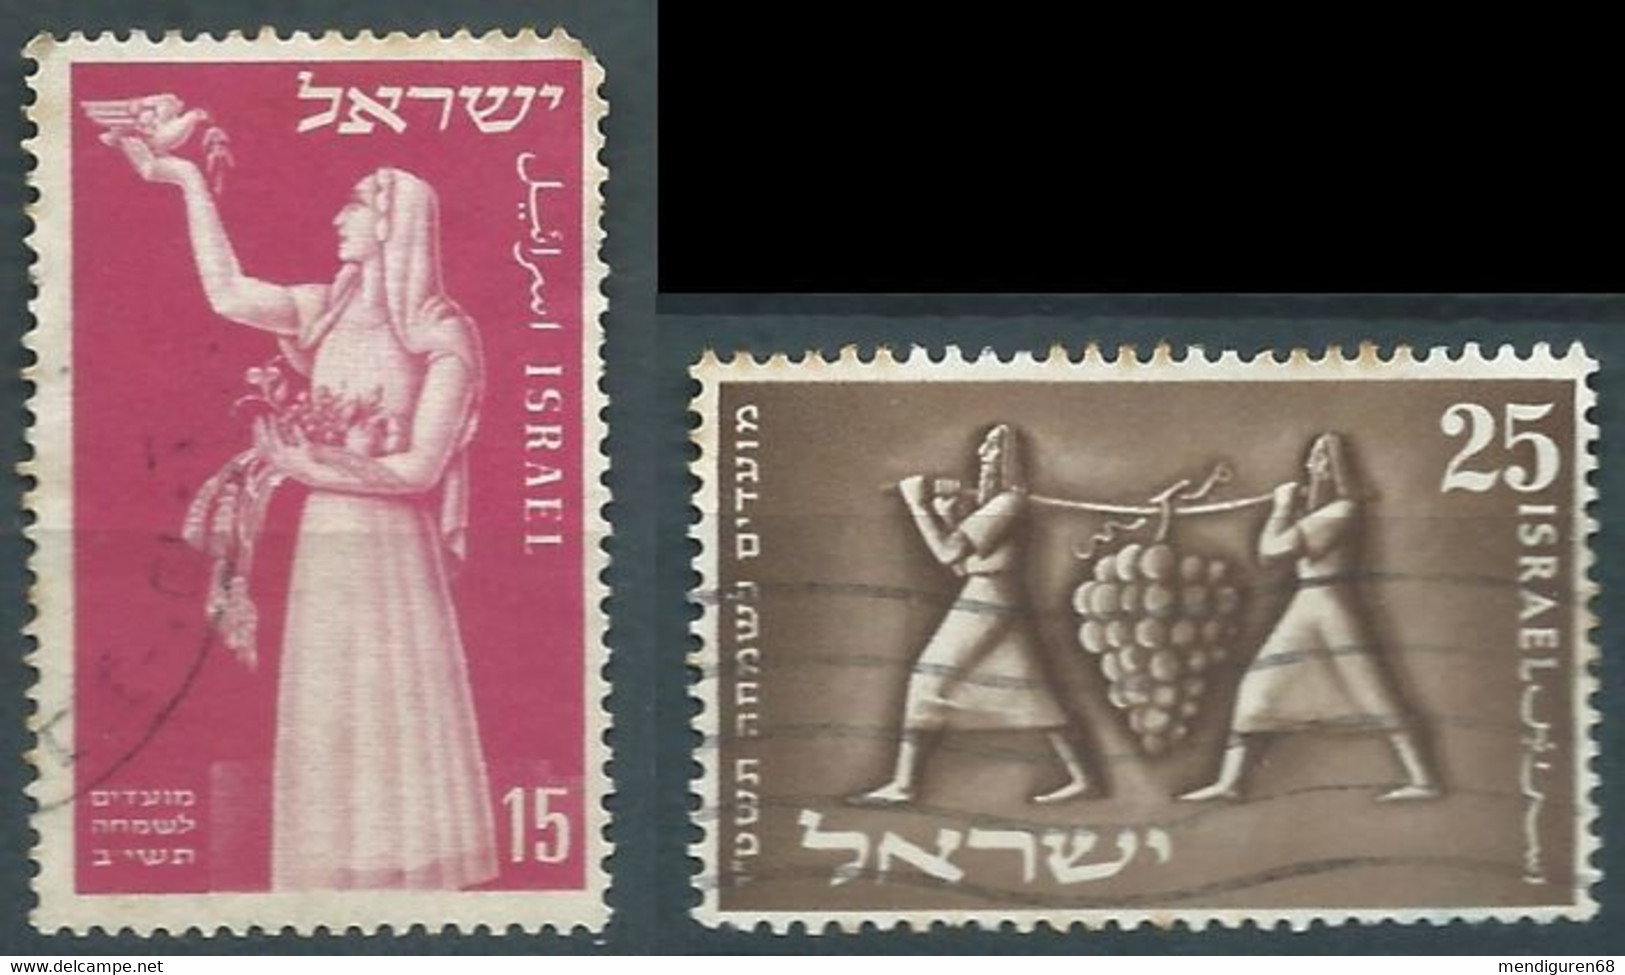 ISRAEL SET 2 STAMPS USED - Used Stamps (without Tabs)